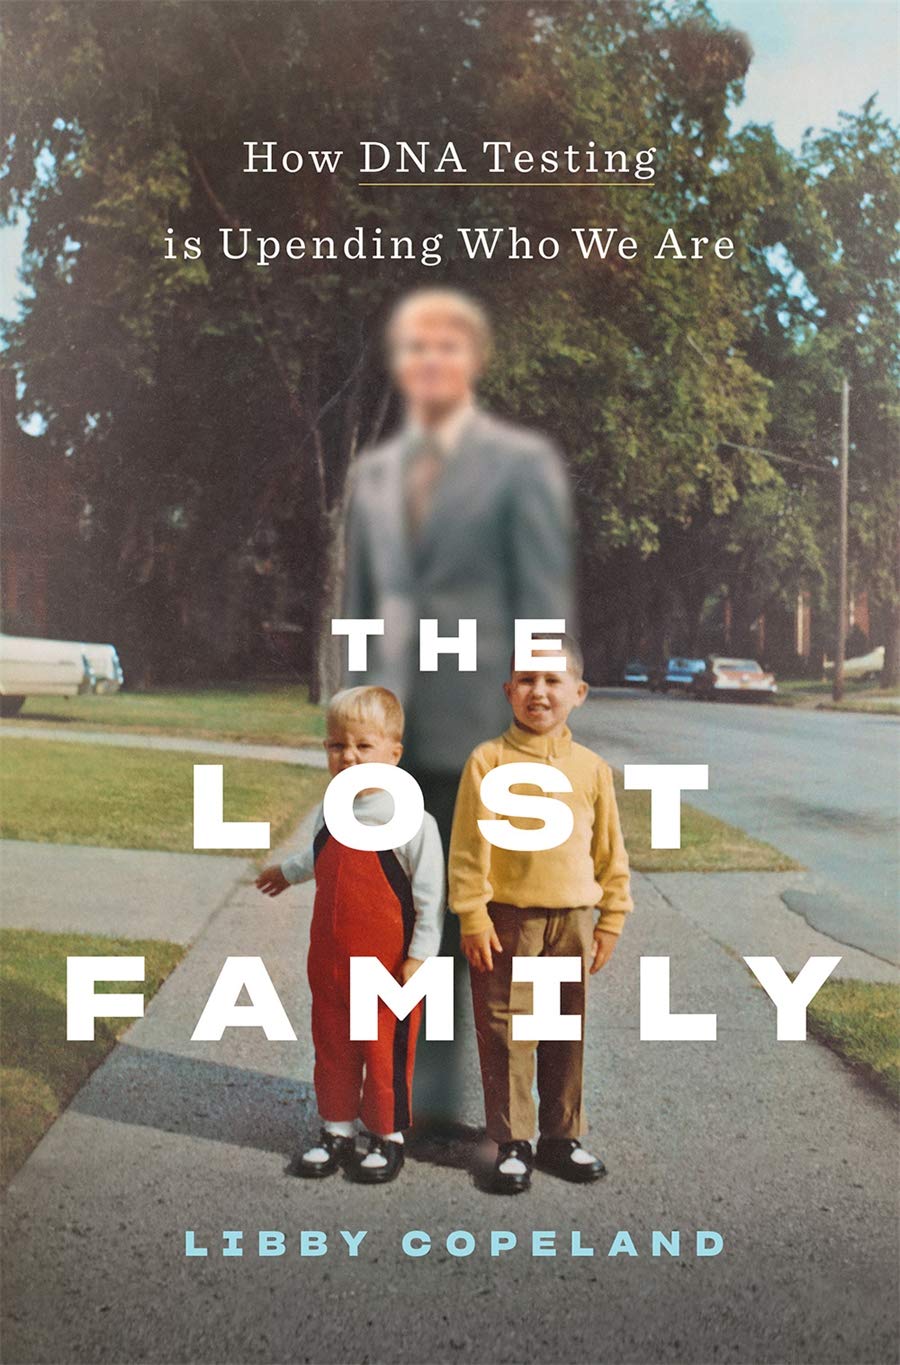 The Lost Family book cover